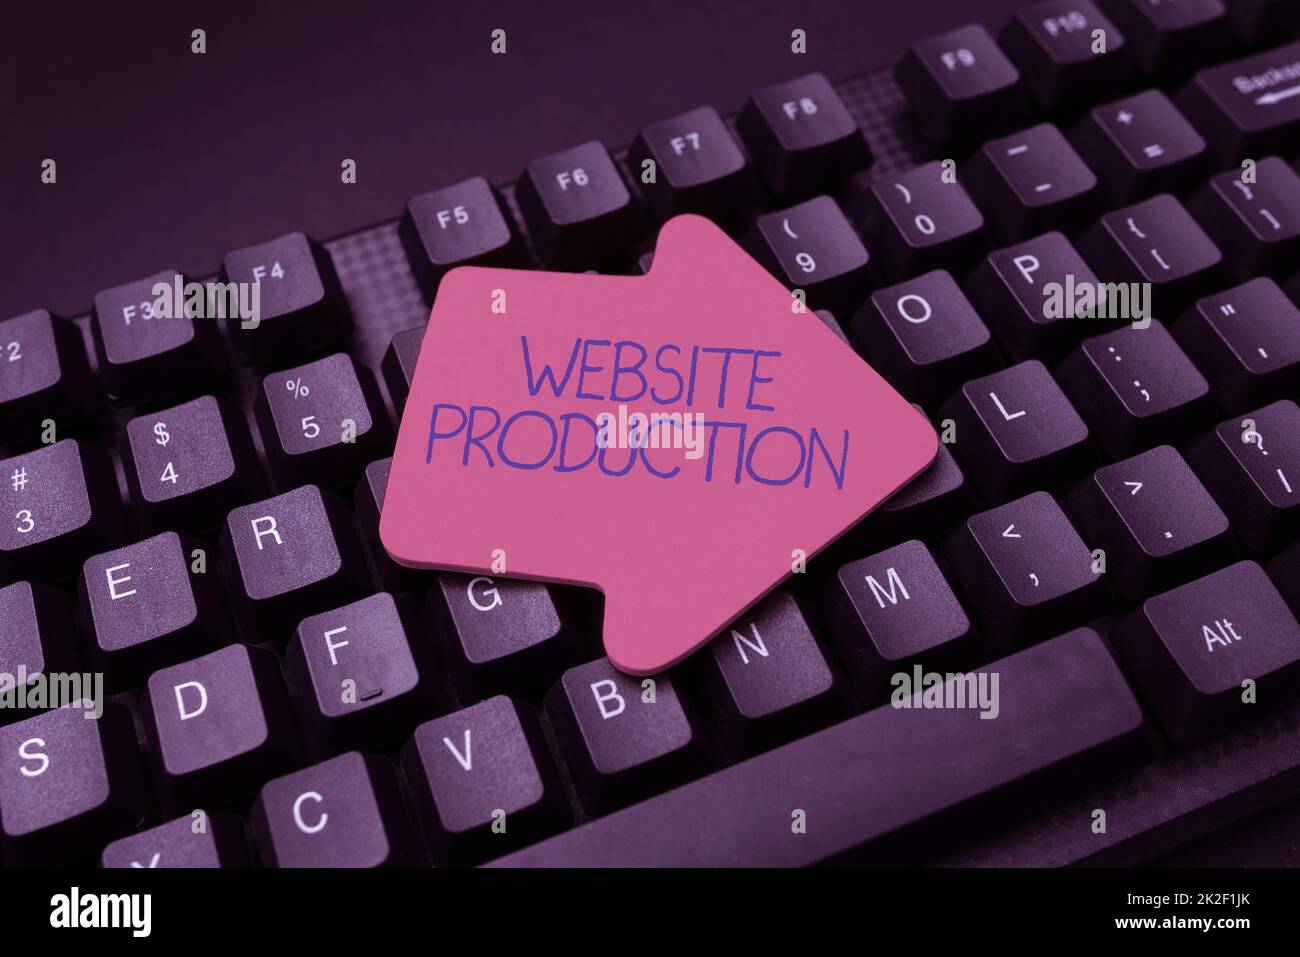 Text showing inspiration Website Production. Word for Website Production Converting Written Notes To Digital Data, Typing Important Coding Files Stock Photo